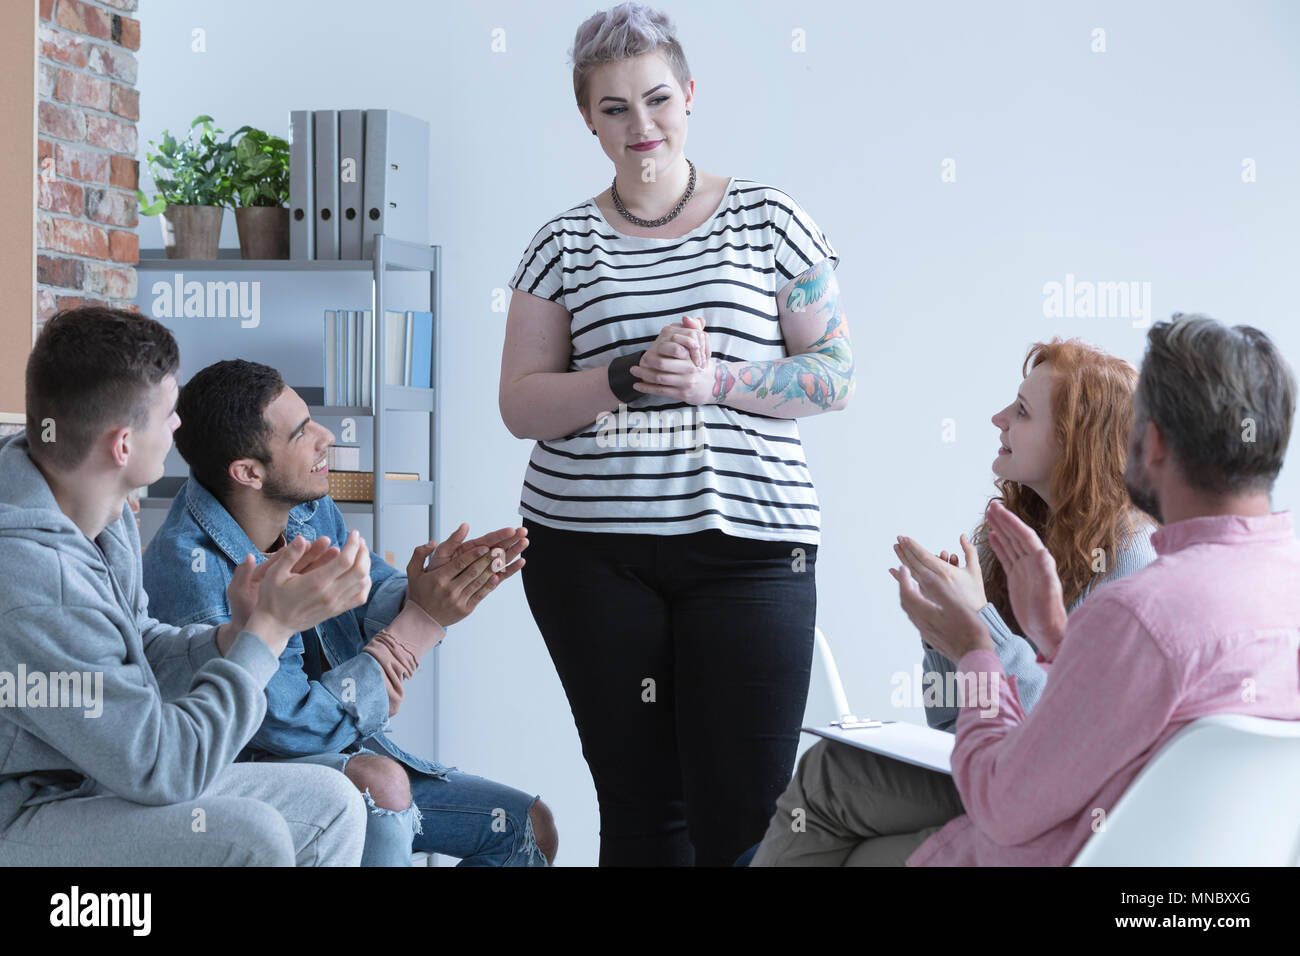 Teenage girl talking in front of support group Stock Photo